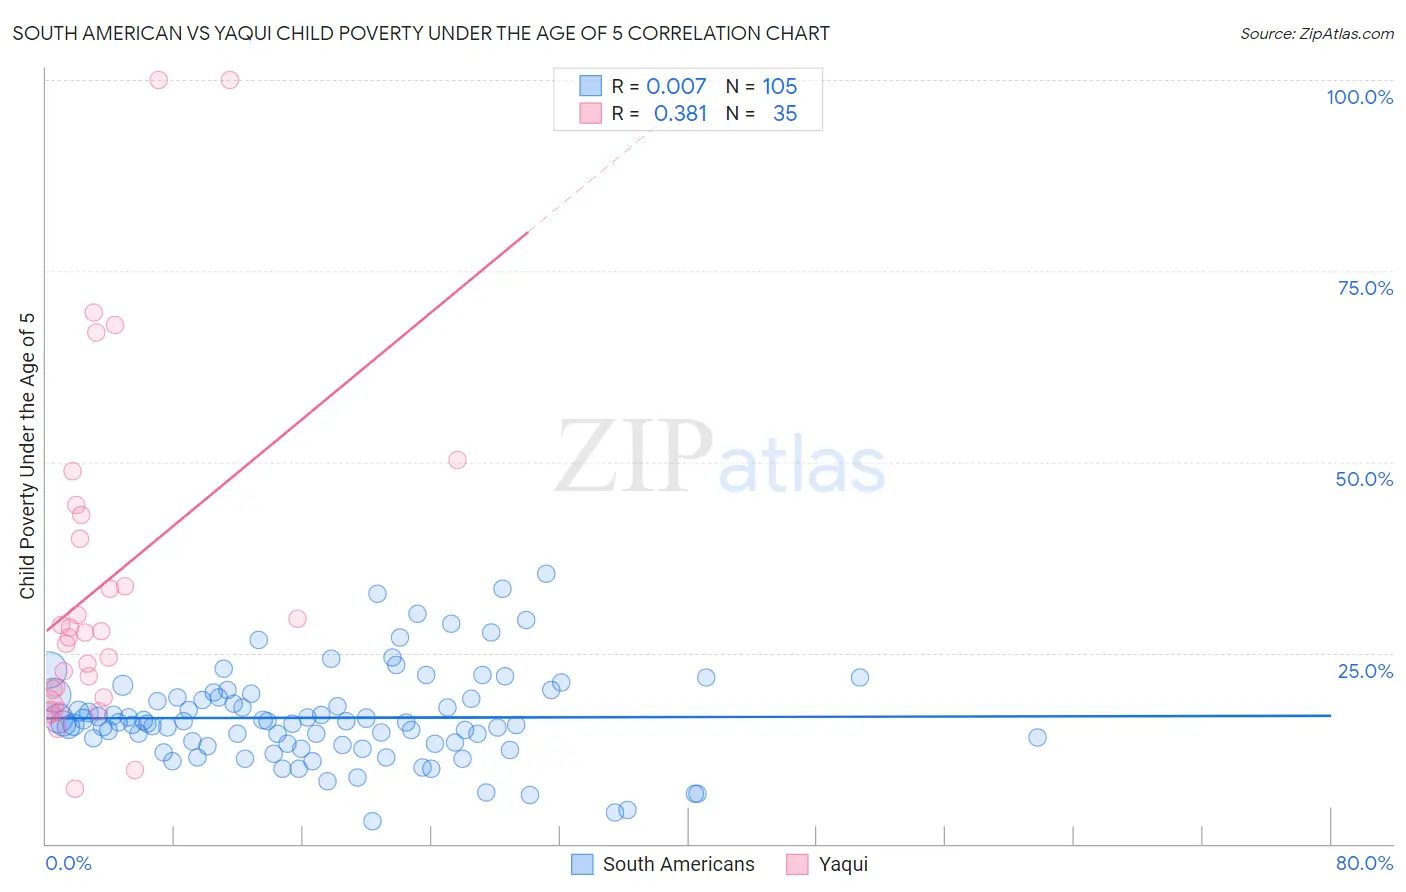 South American vs Yaqui Child Poverty Under the Age of 5